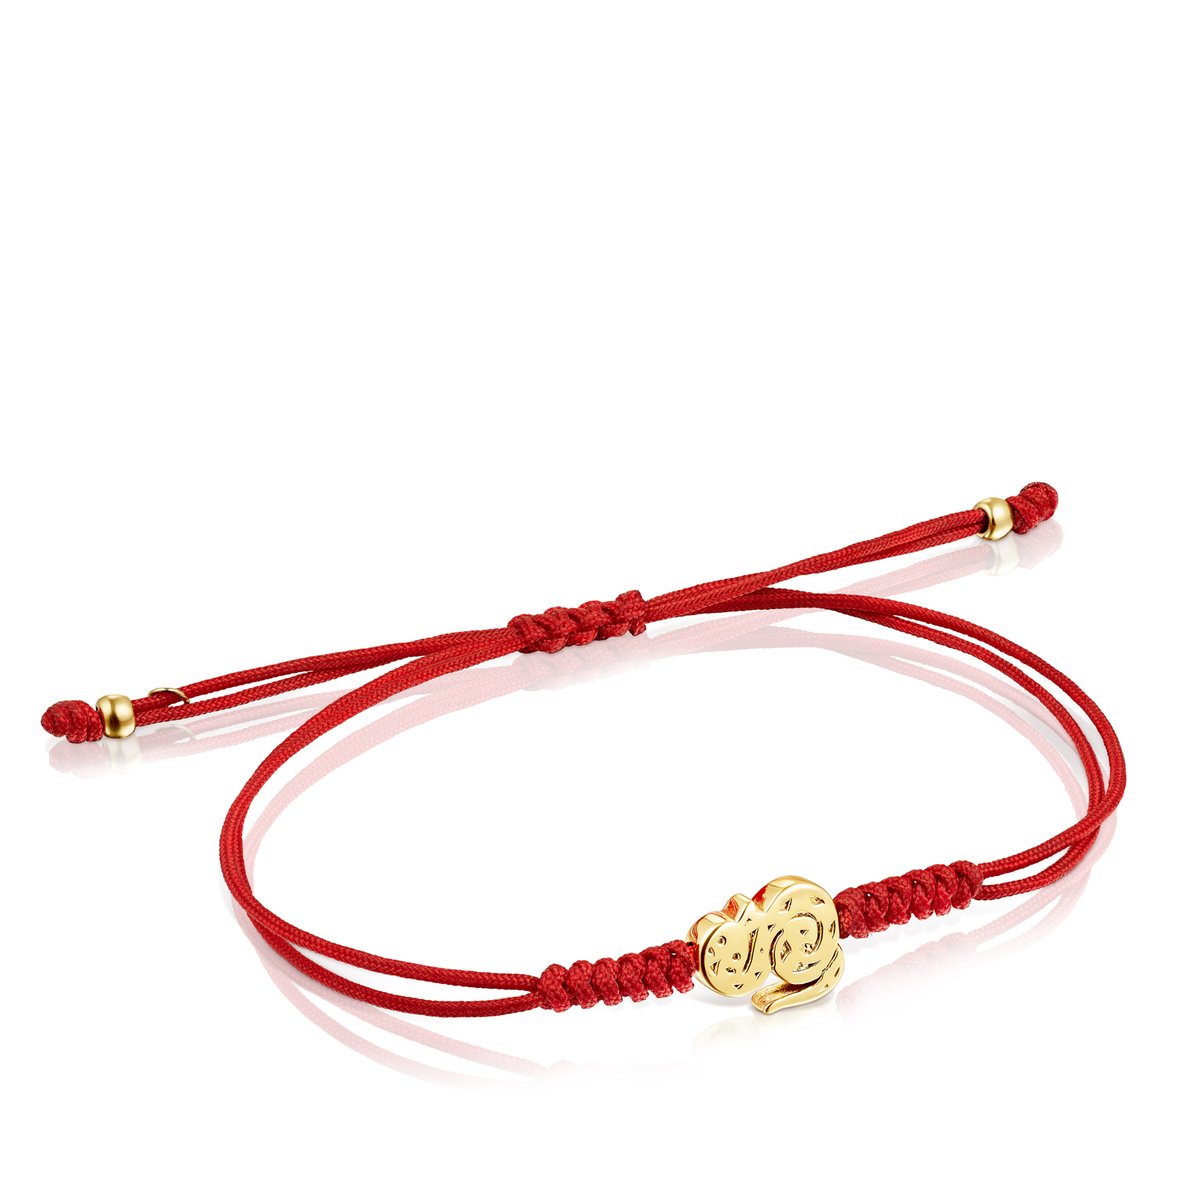 Tous Chinese Horoscope Snake Bracelet in Gold and Red Cord 918431110